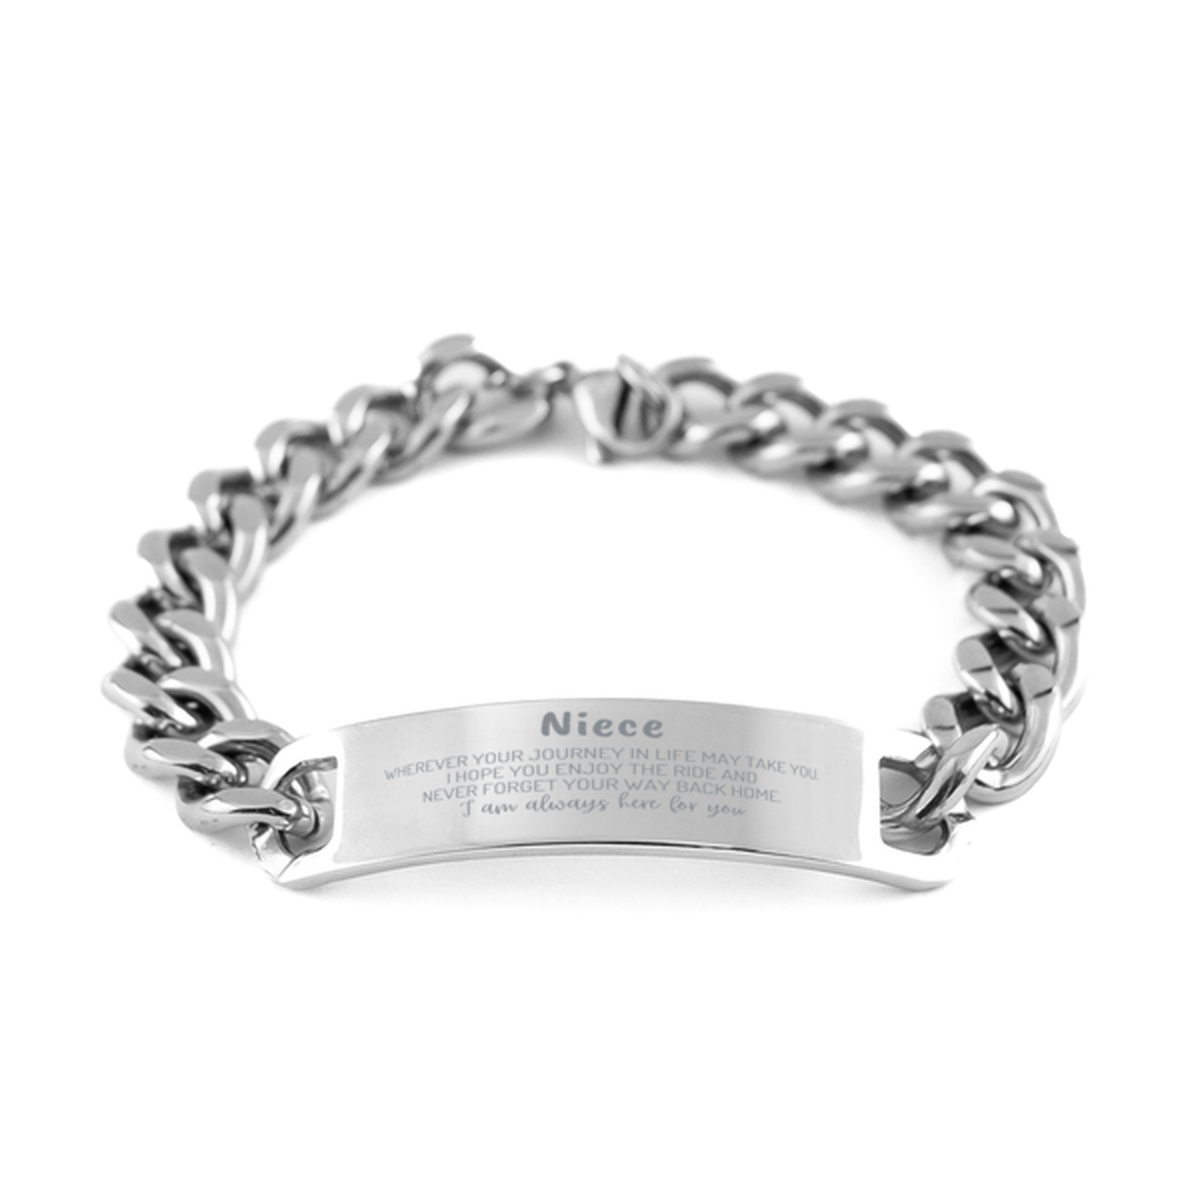 Niece wherever your journey in life may take you, I am always here for you Niece Cuban Chain Stainless Steel Bracelet, Awesome Christmas Gifts For Niece, Niece Birthday Gifts for Men Women Family Loved One